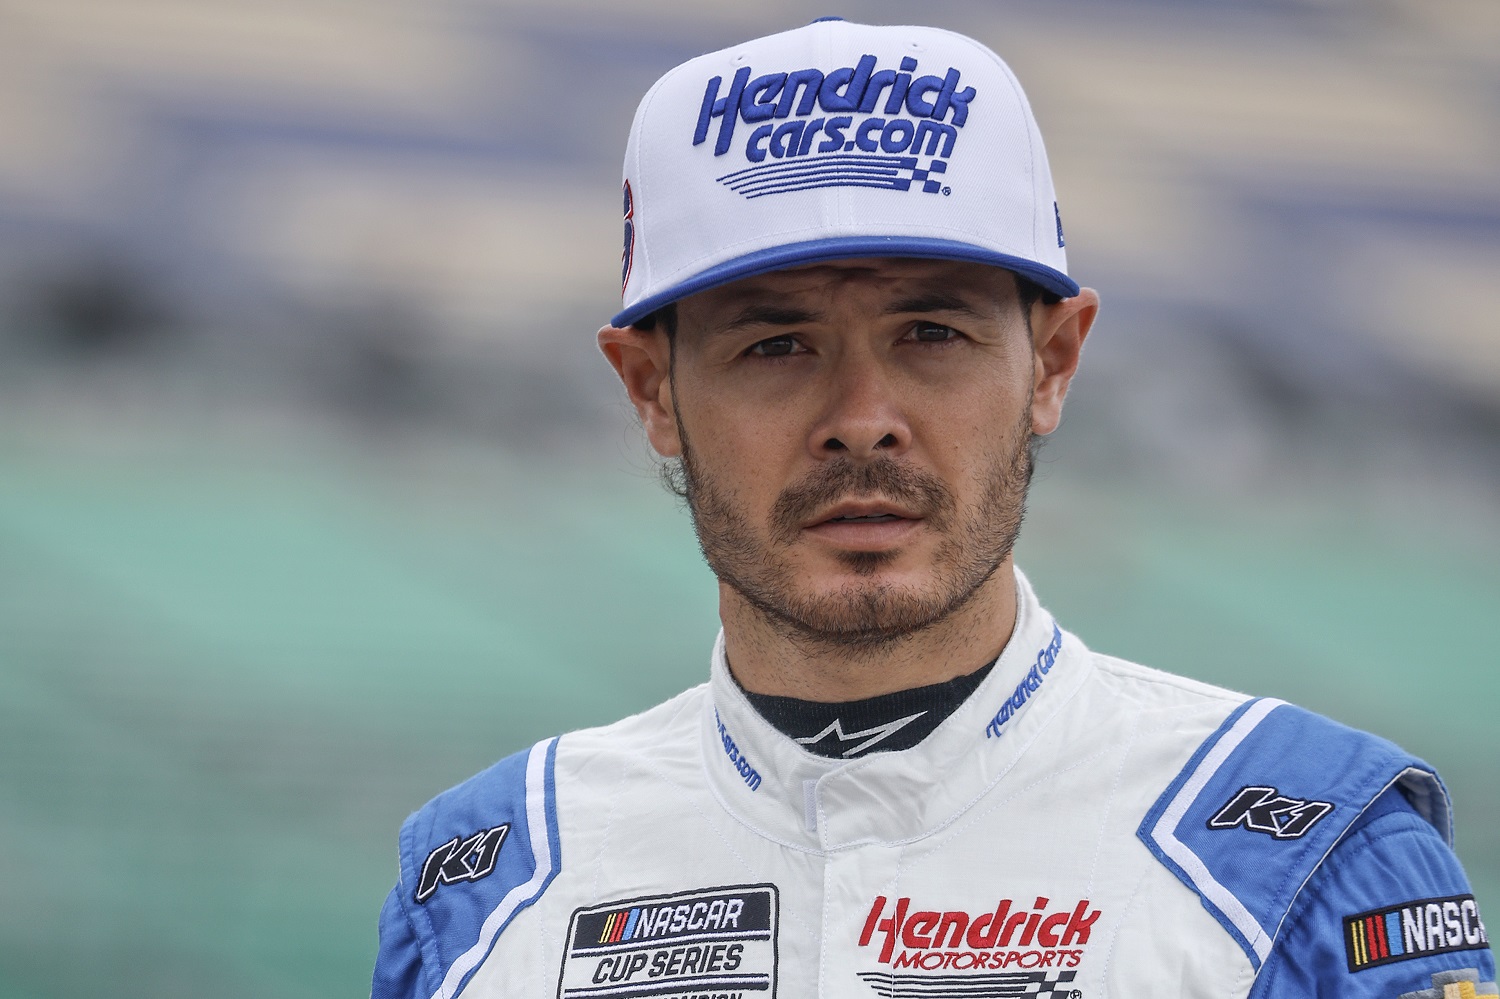 Kyle Larson walks the grid during practice for the NASCAR Cup Series Hollywood Casino 400 at Kansas Speedway on Sept. 10, 2022, in Kansas City, Kansas.